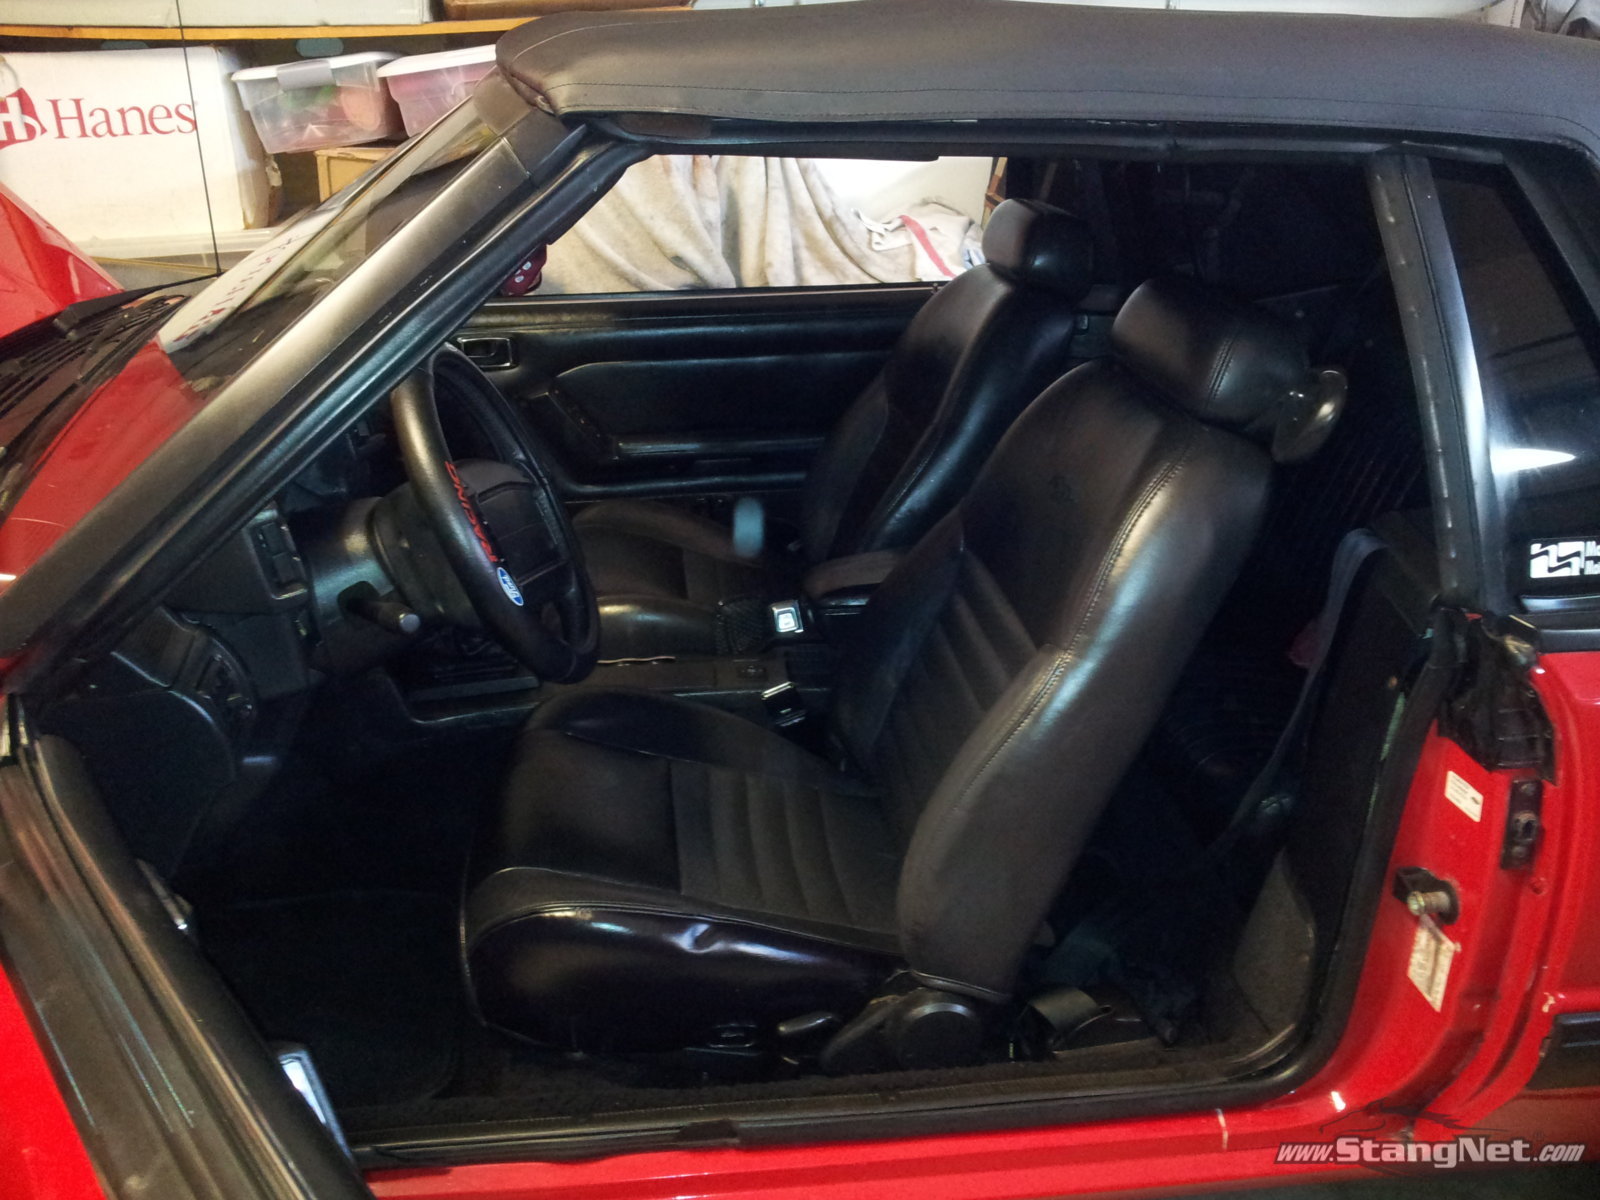 What Seats Work In The Fox Stangnet, Will Mustang Coupe Seats Fit In A Convertible